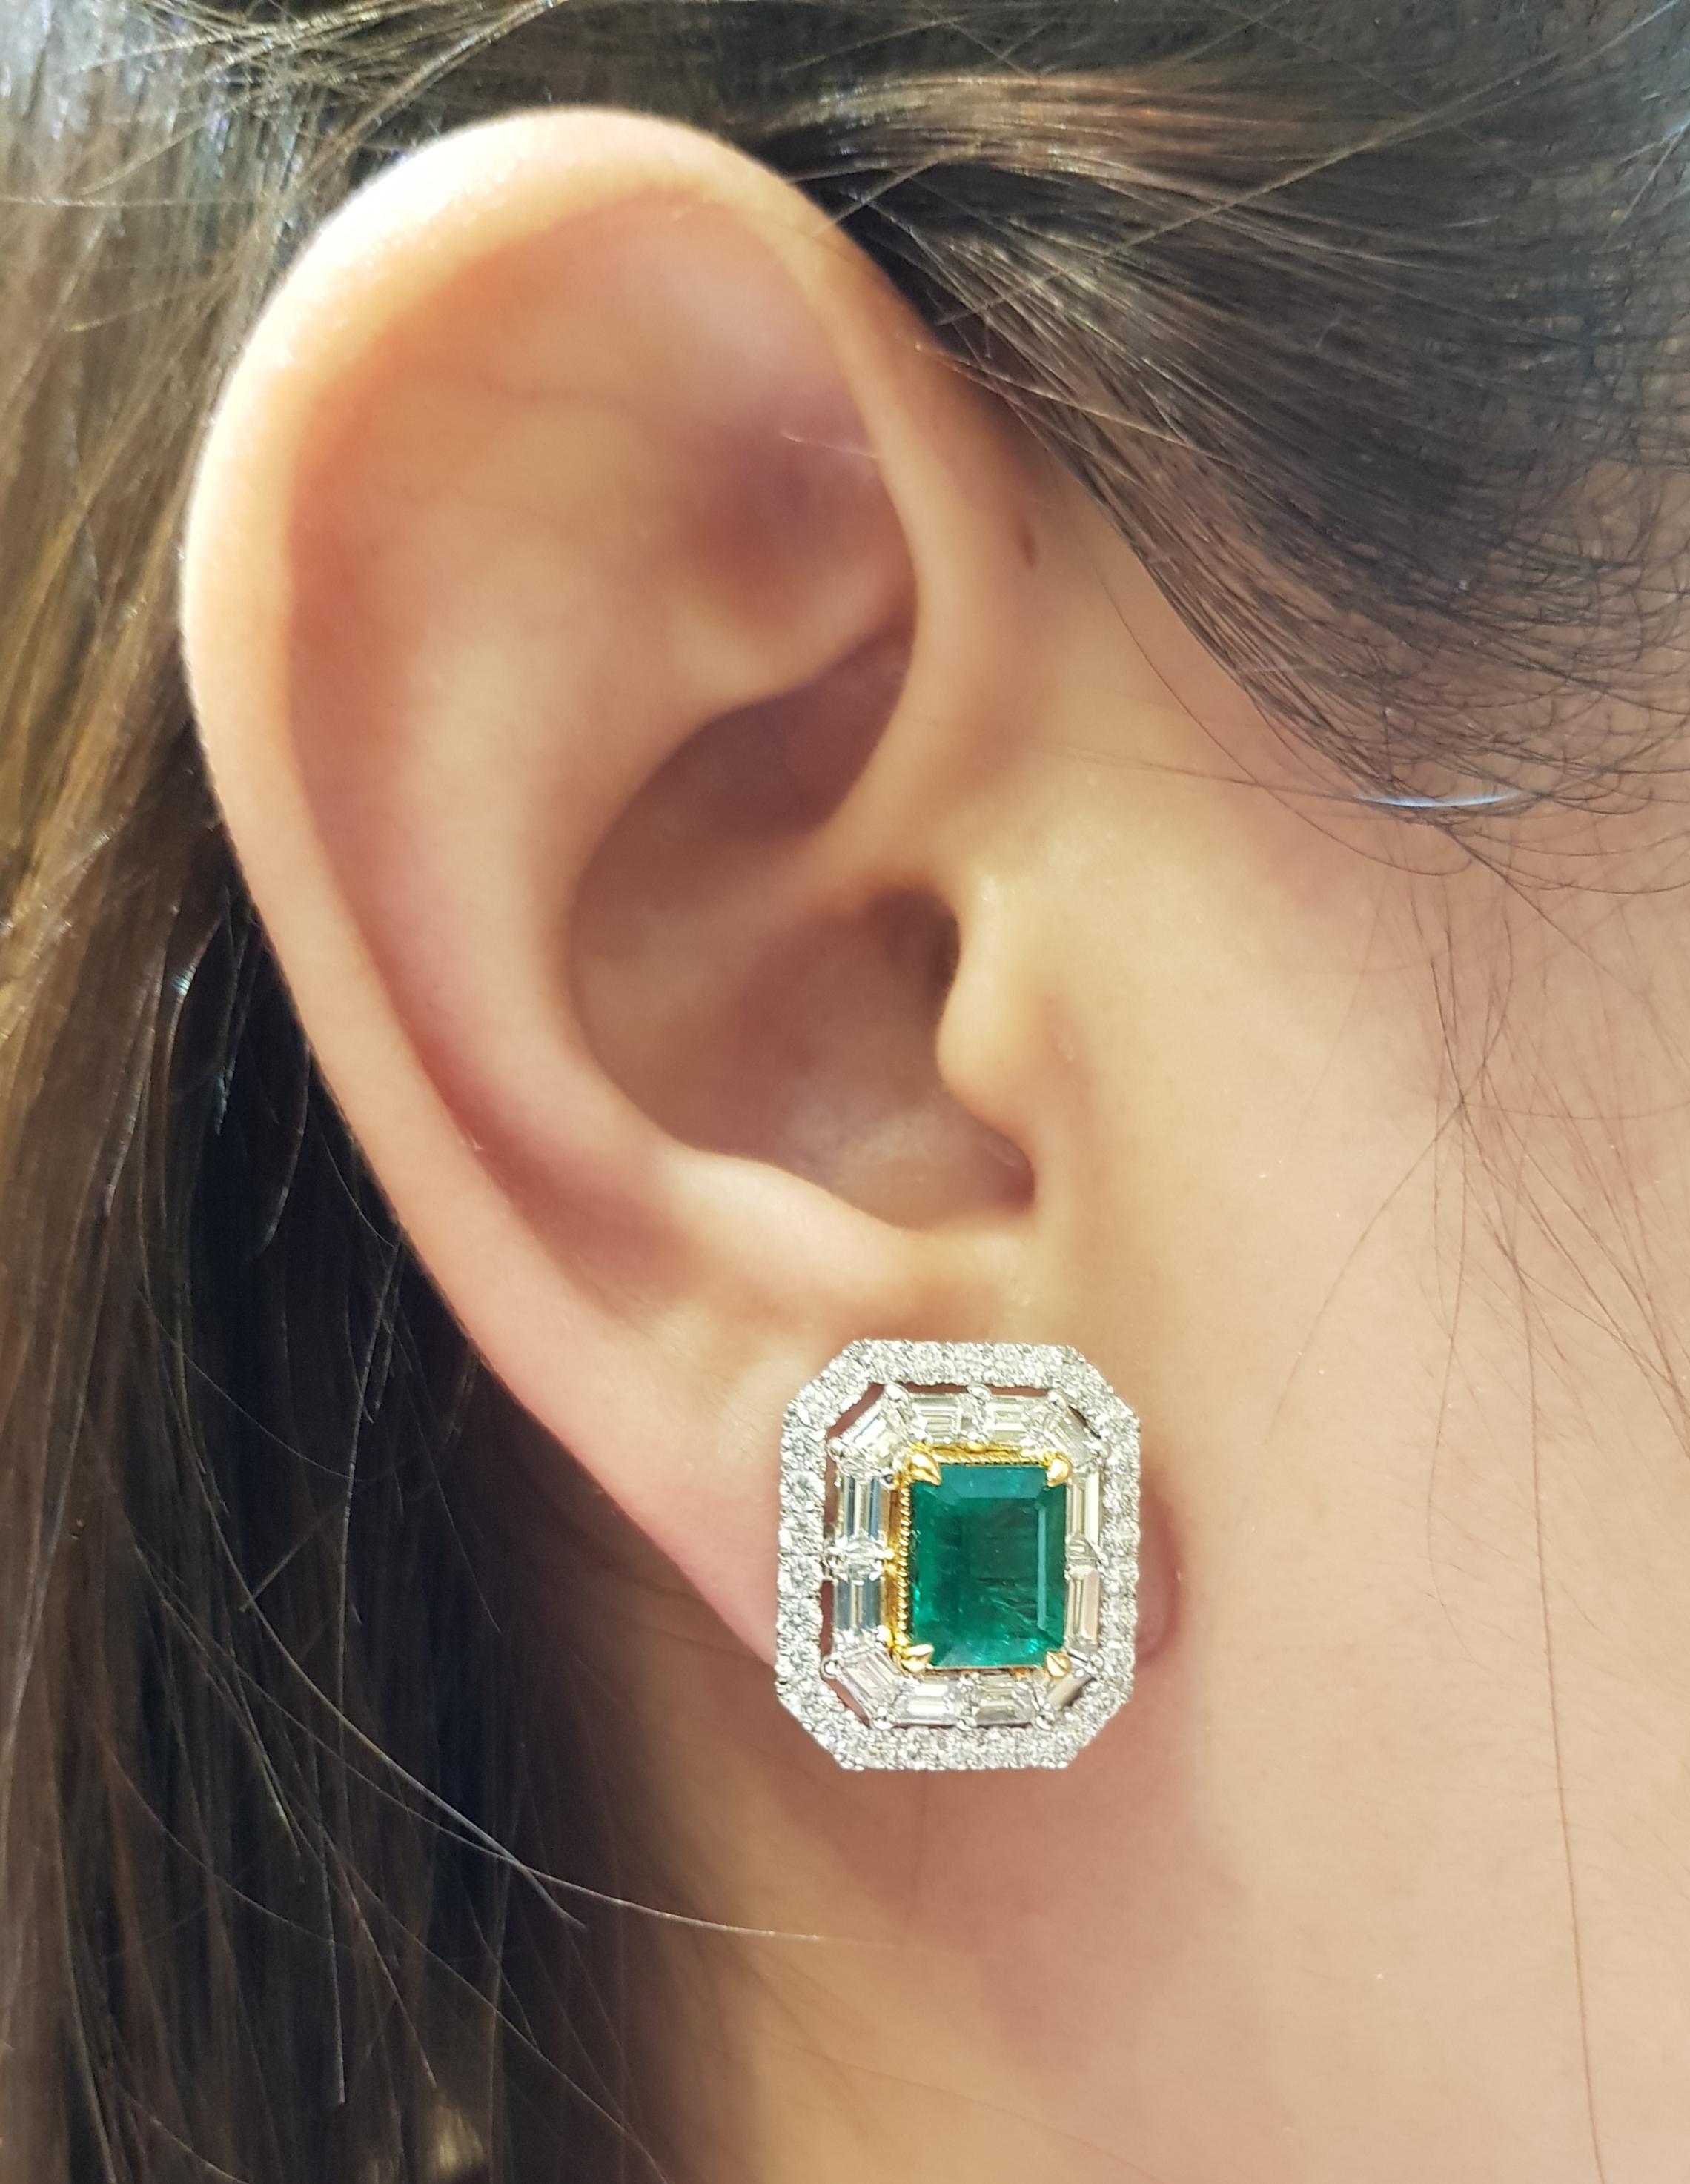 Emerald 3.92 carats with Diamond 3.50 carats Earrings set in 18 Karat White Gold Settings

Width:  1.8 cm 
Length: 1.5 cm
Total Weight: 15.24 grams

